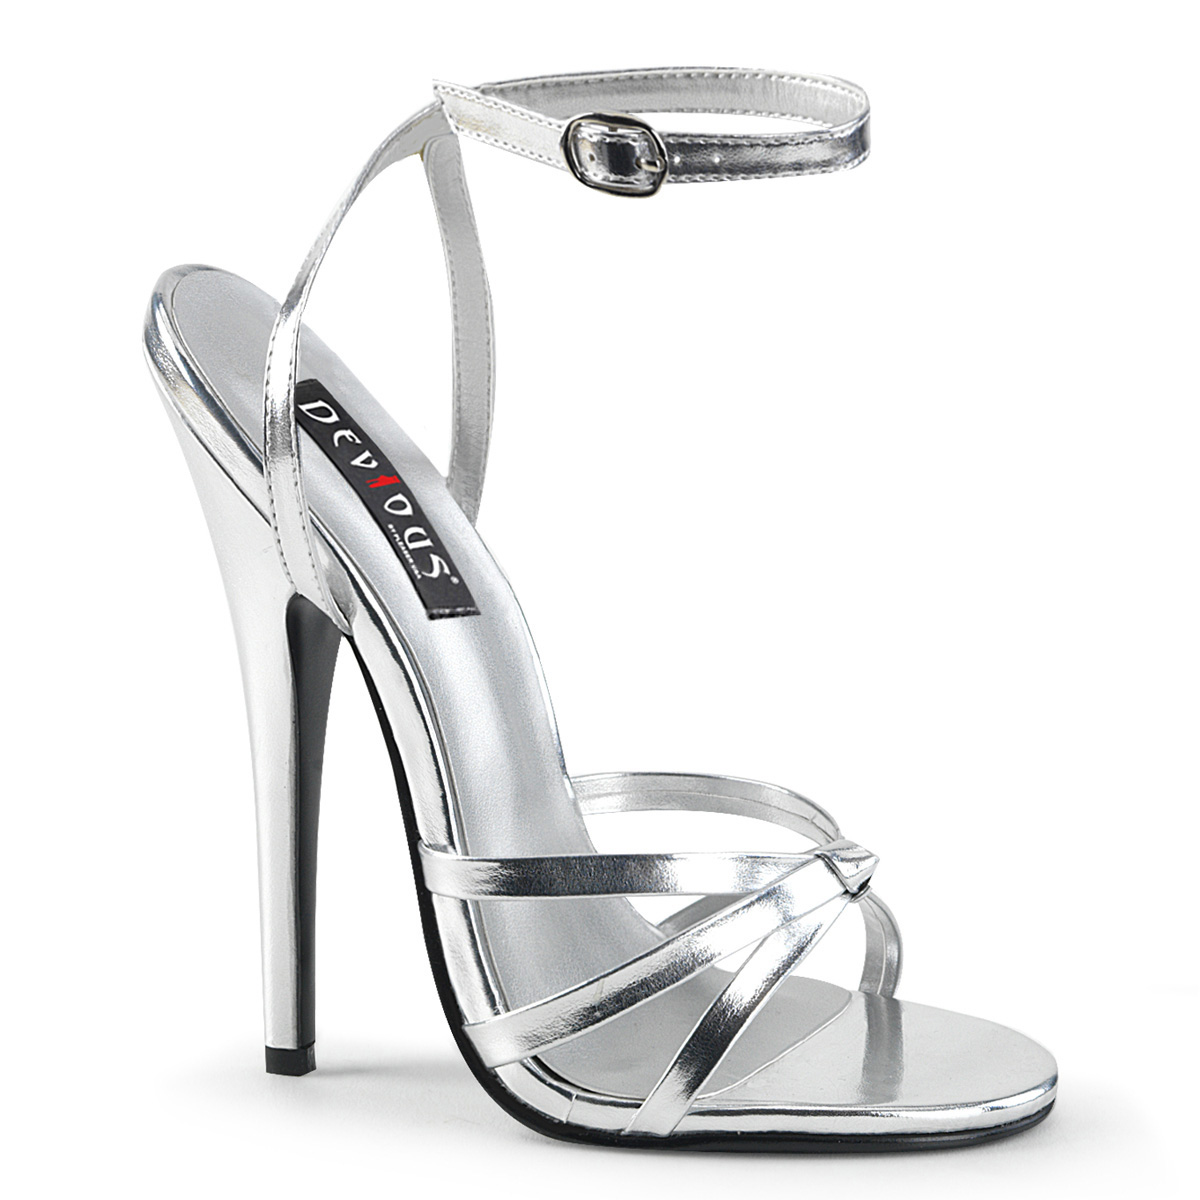 PLEASER DEVIOUS DOMINA-108 SILVER STILETTO HEEL ANKLE STRAP SANDALS SHOES 